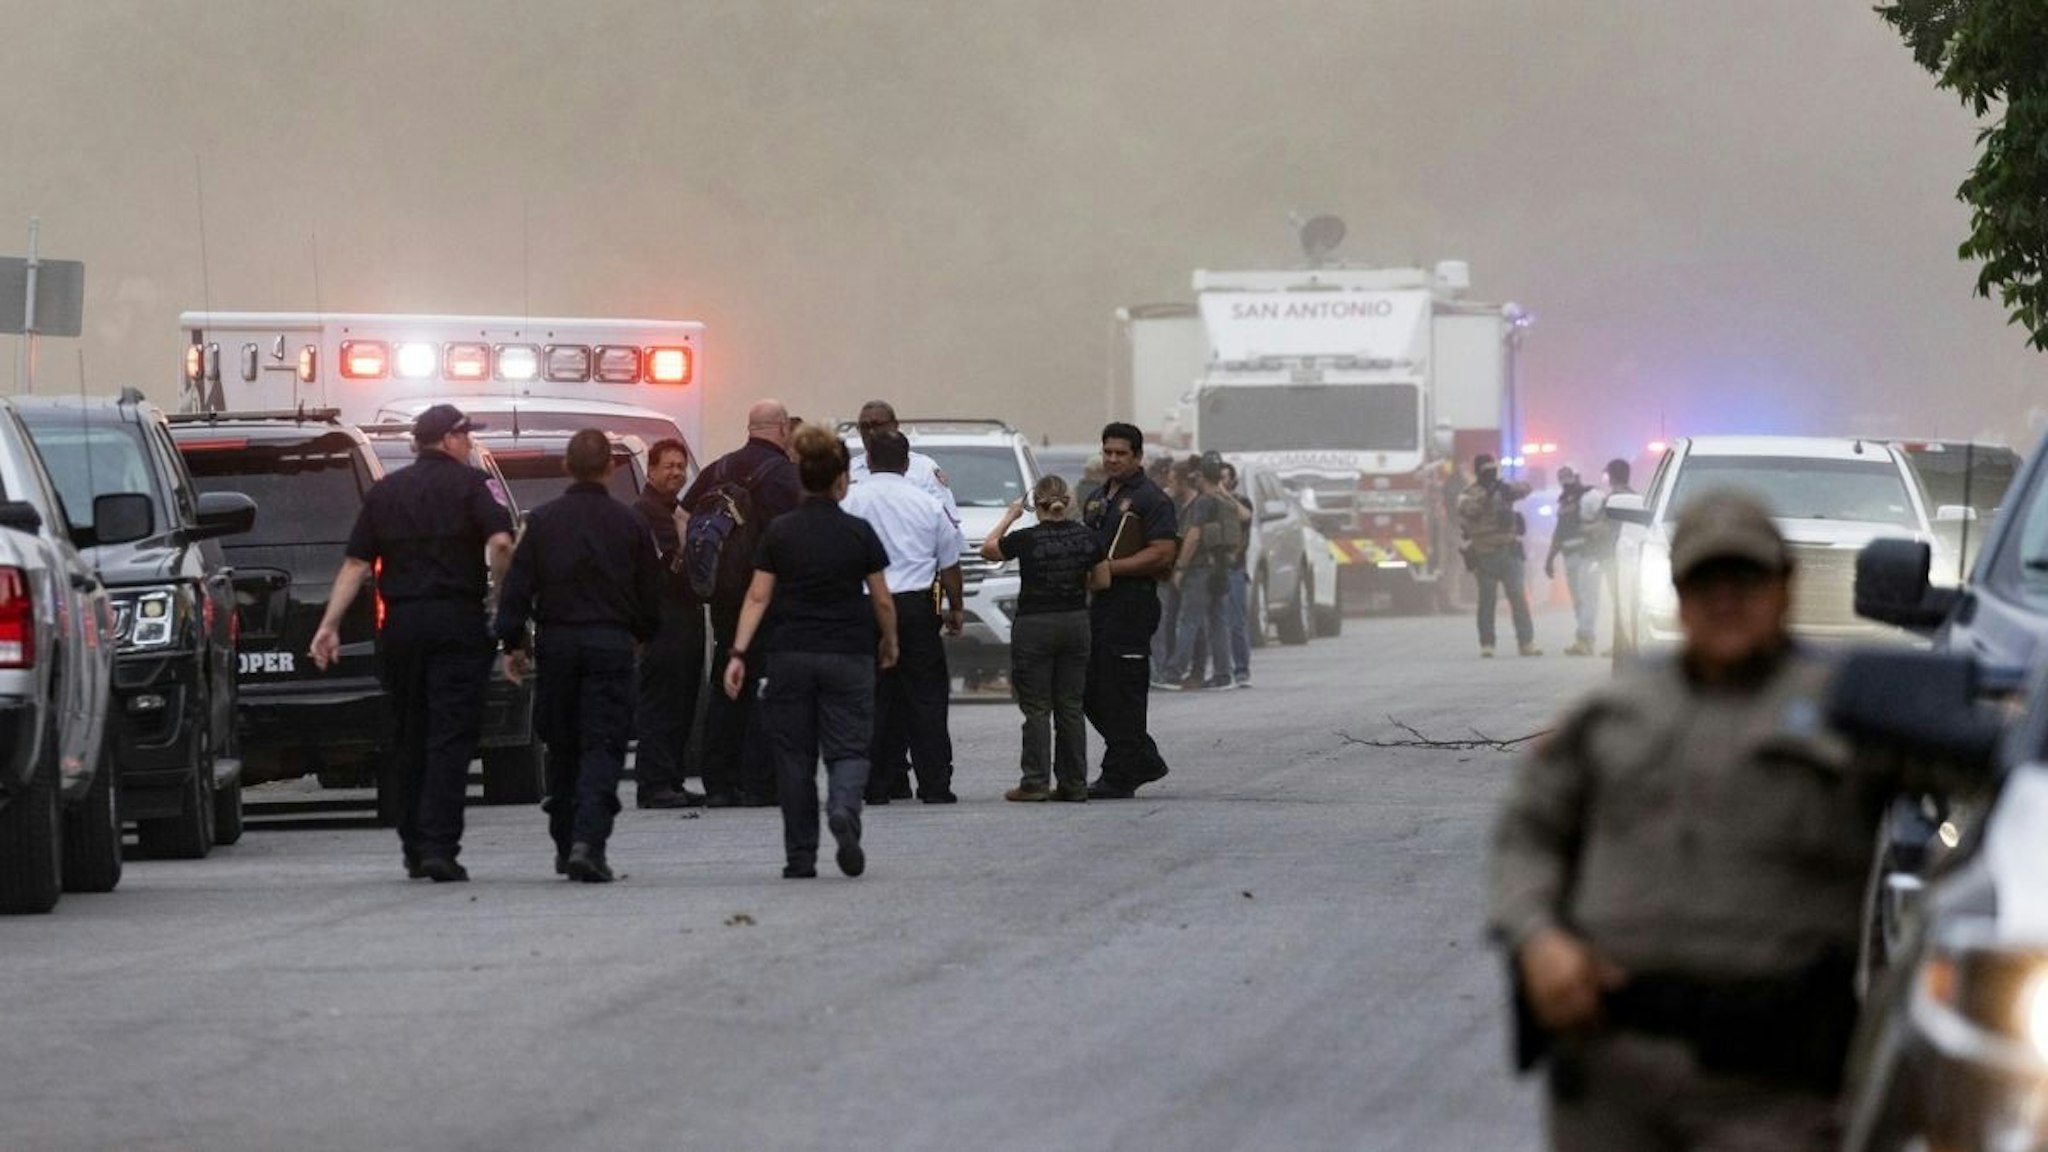 Law enforcement work the scene after a mass shooting at Robb Elementary School where 19 people, including 18 children, were killed on May 24, 2022 in Uvalde, Texas.